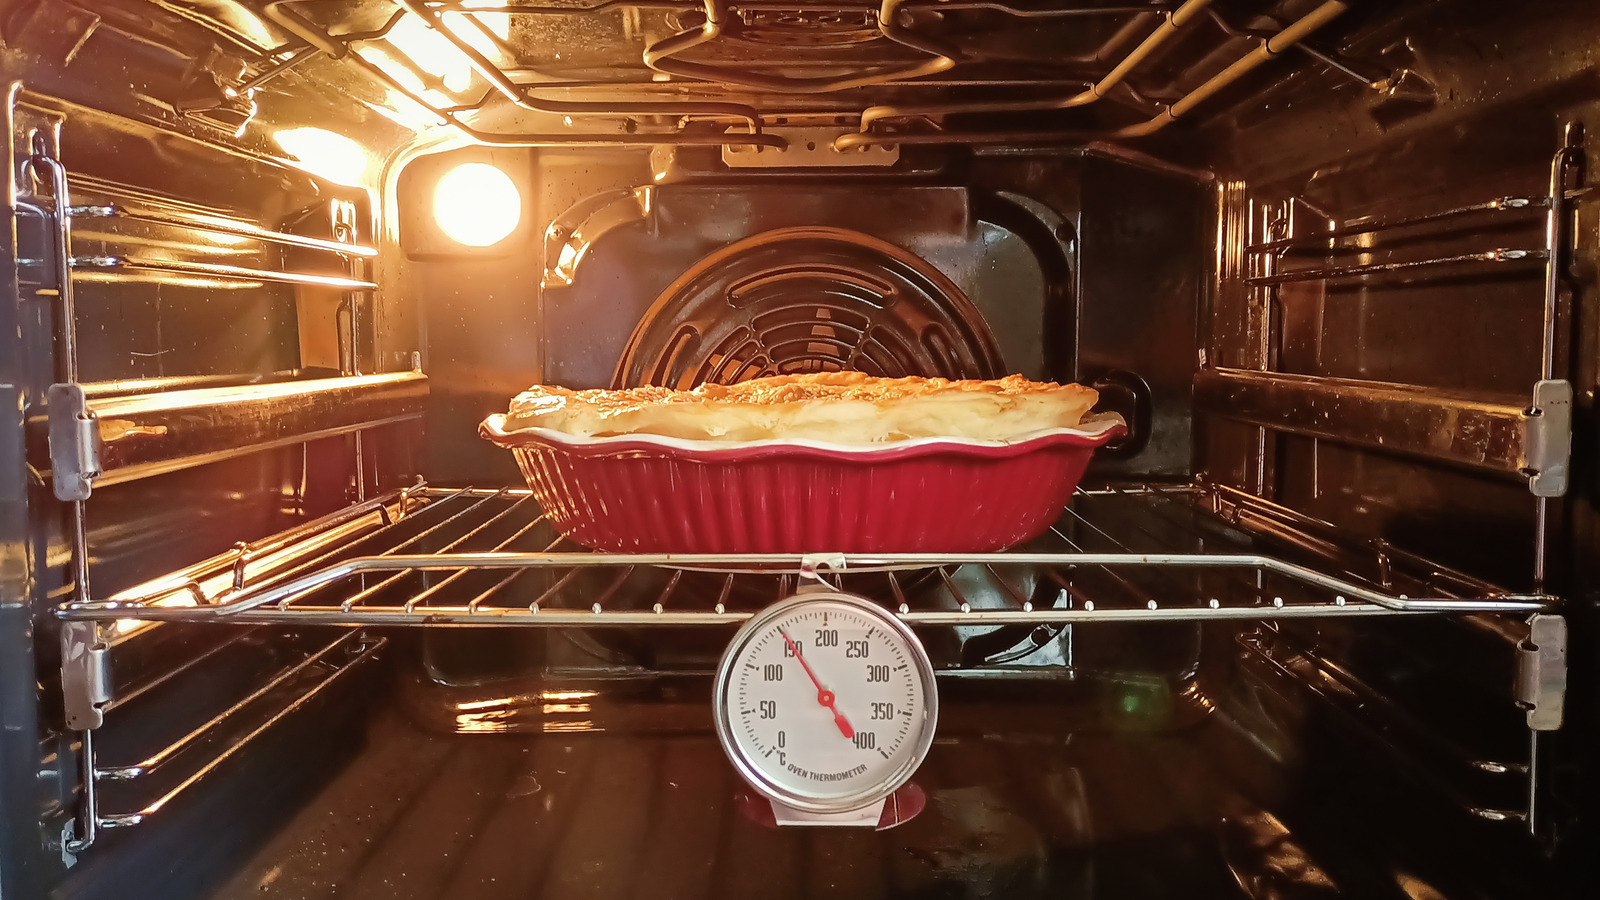 What is the Best Oven for Baking?